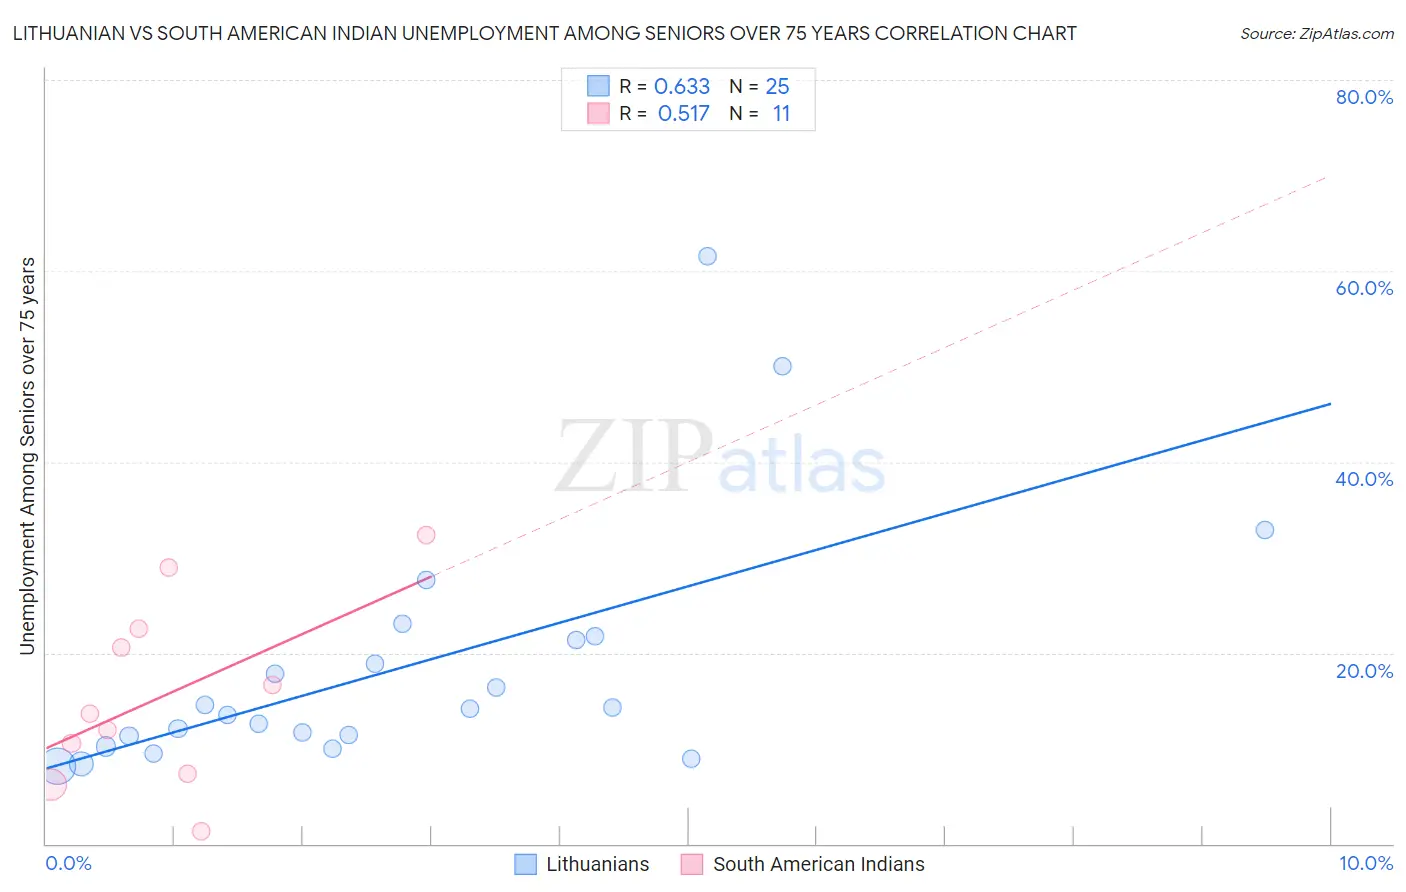 Lithuanian vs South American Indian Unemployment Among Seniors over 75 years